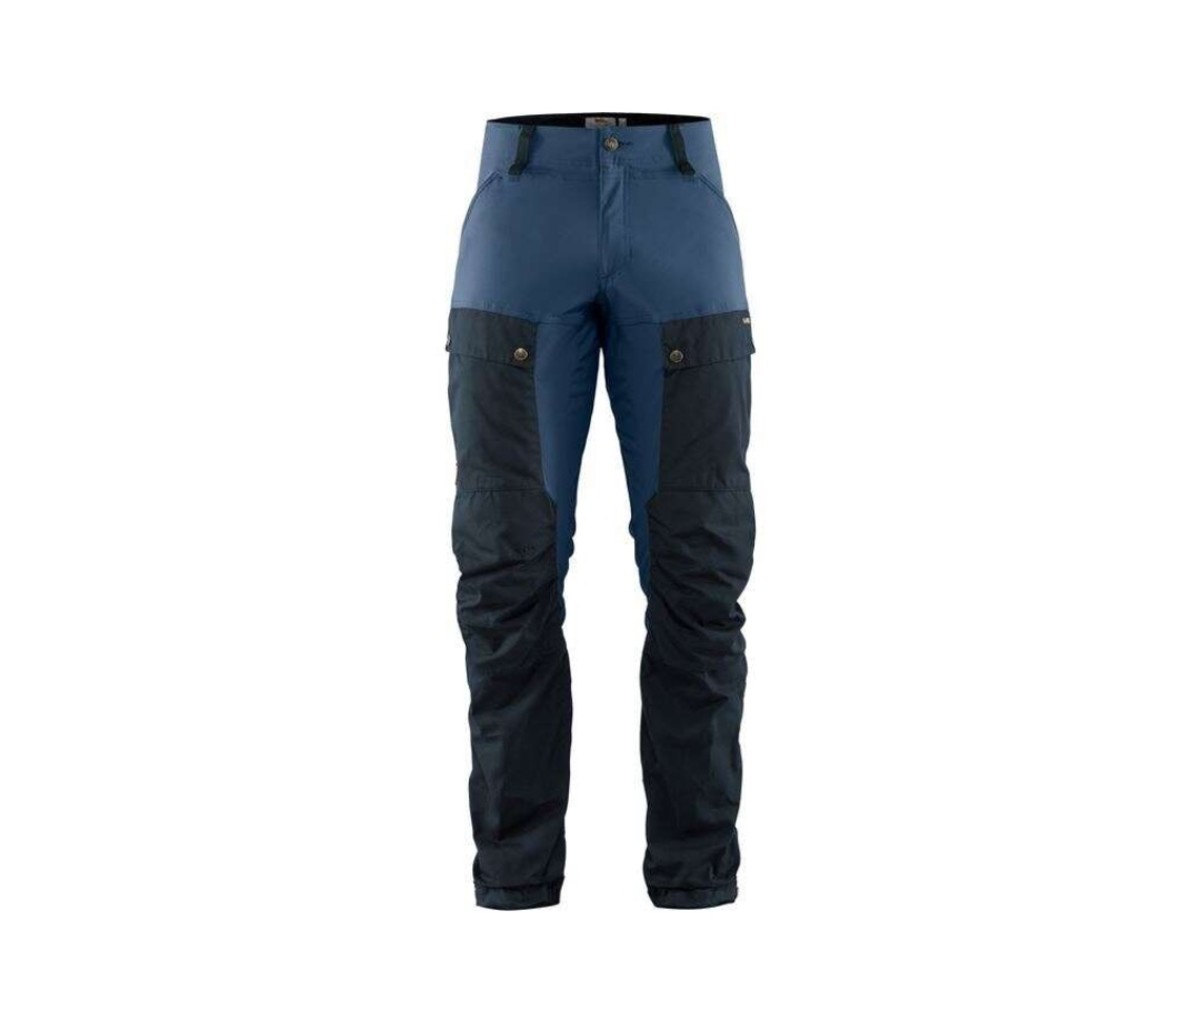 Clear away thorns and twigs in these hybrid Keb pants from Fjallraven while staying cool.